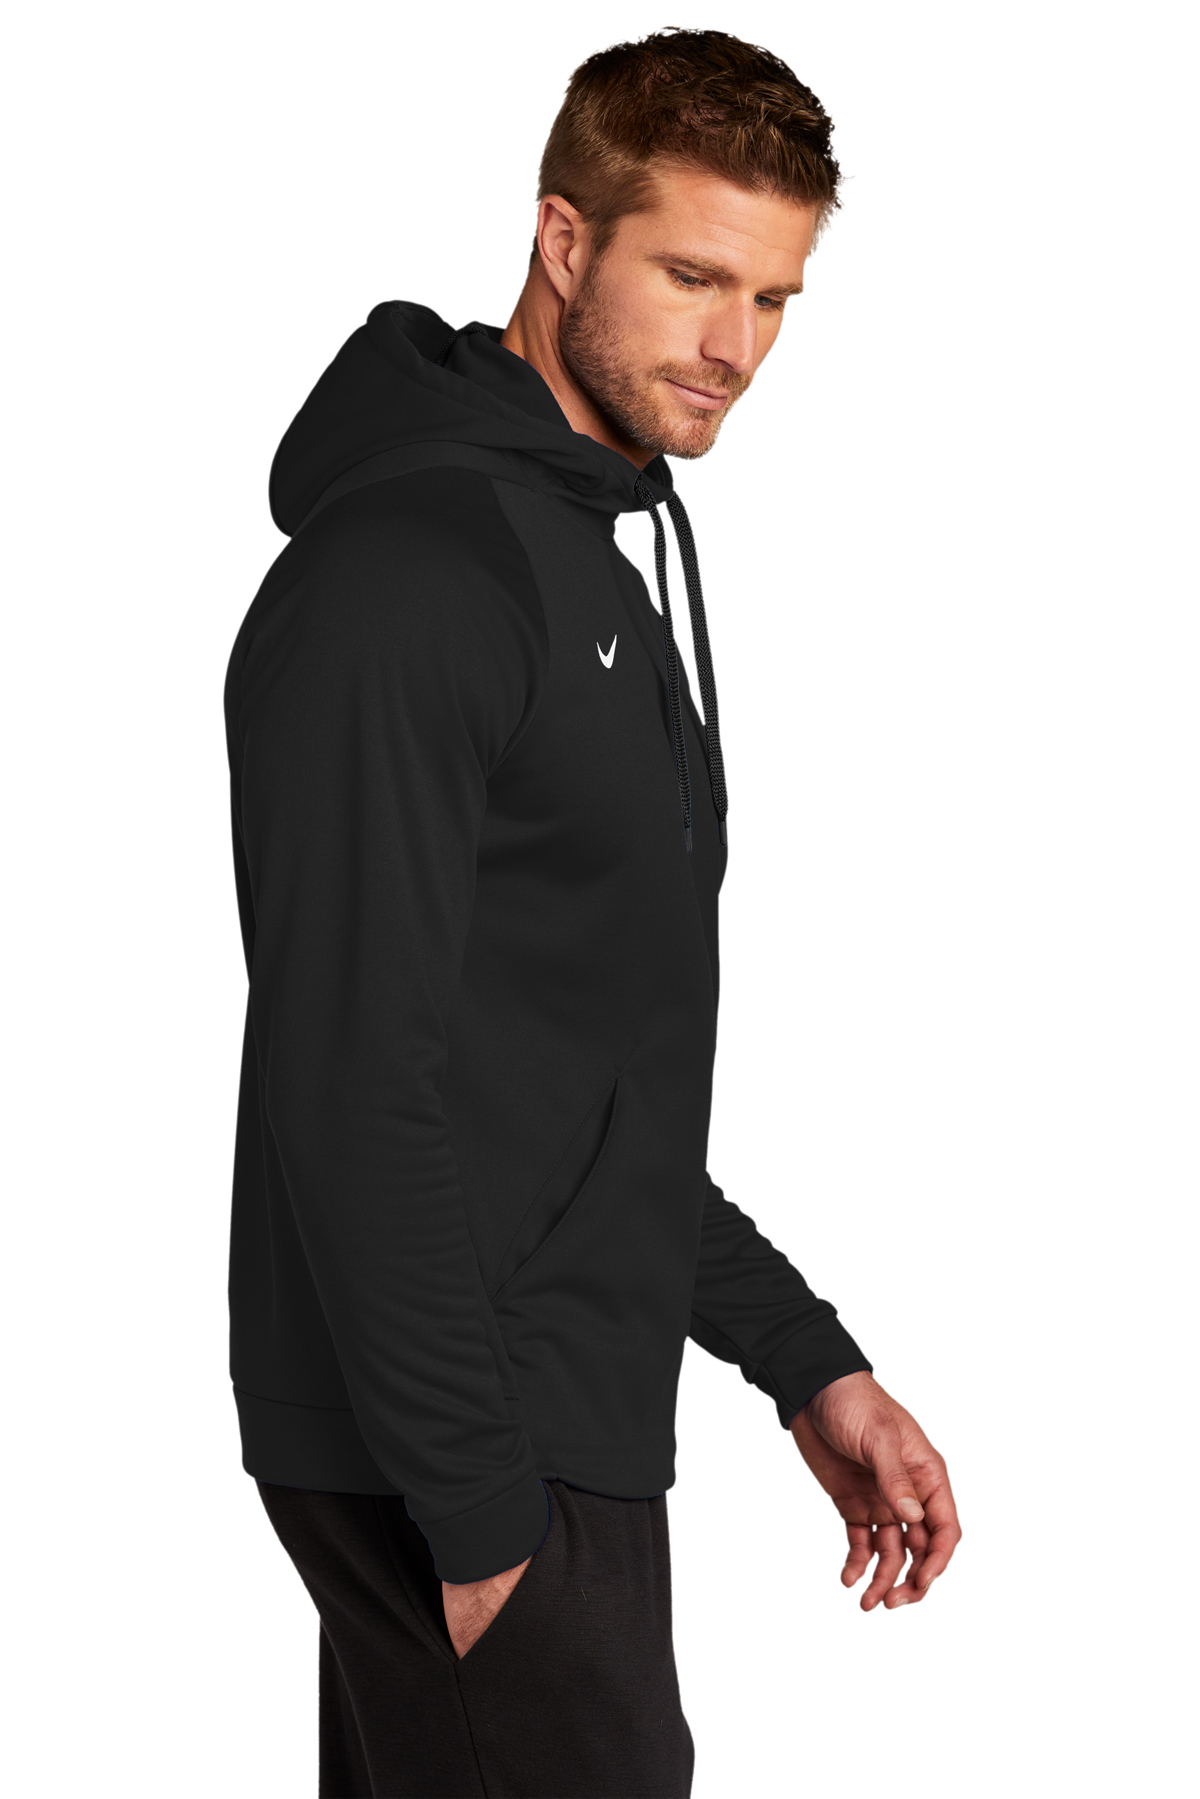 Nike Therma-FIT Pullover Fleece Hoodie | Product | Company Casuals